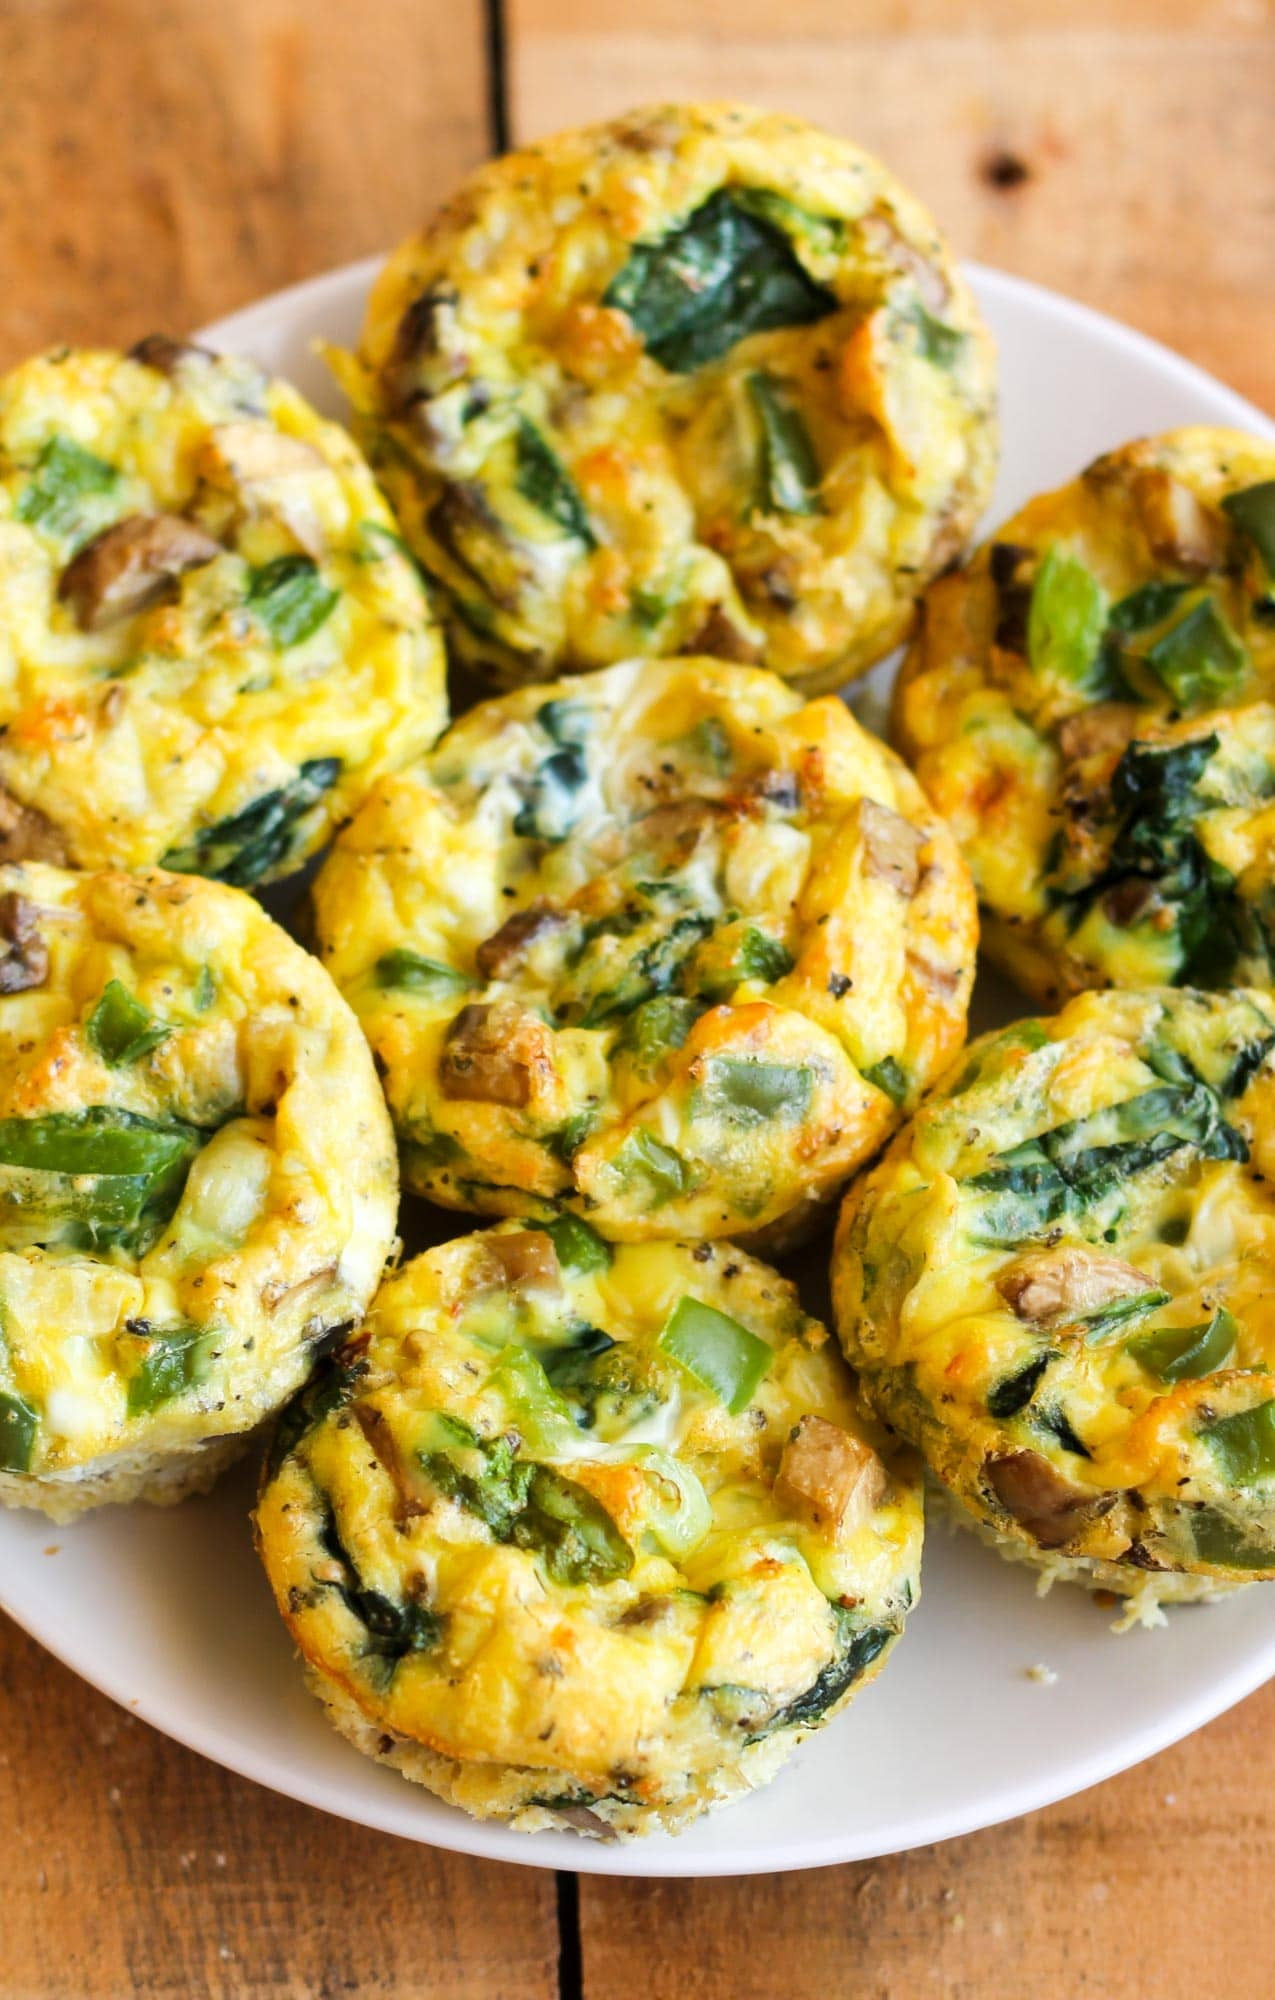 Healthy Breakfast Egg Muffins With Spinach
 Spinach Mushroom Asiago Egg Muffins Smile Sandwich